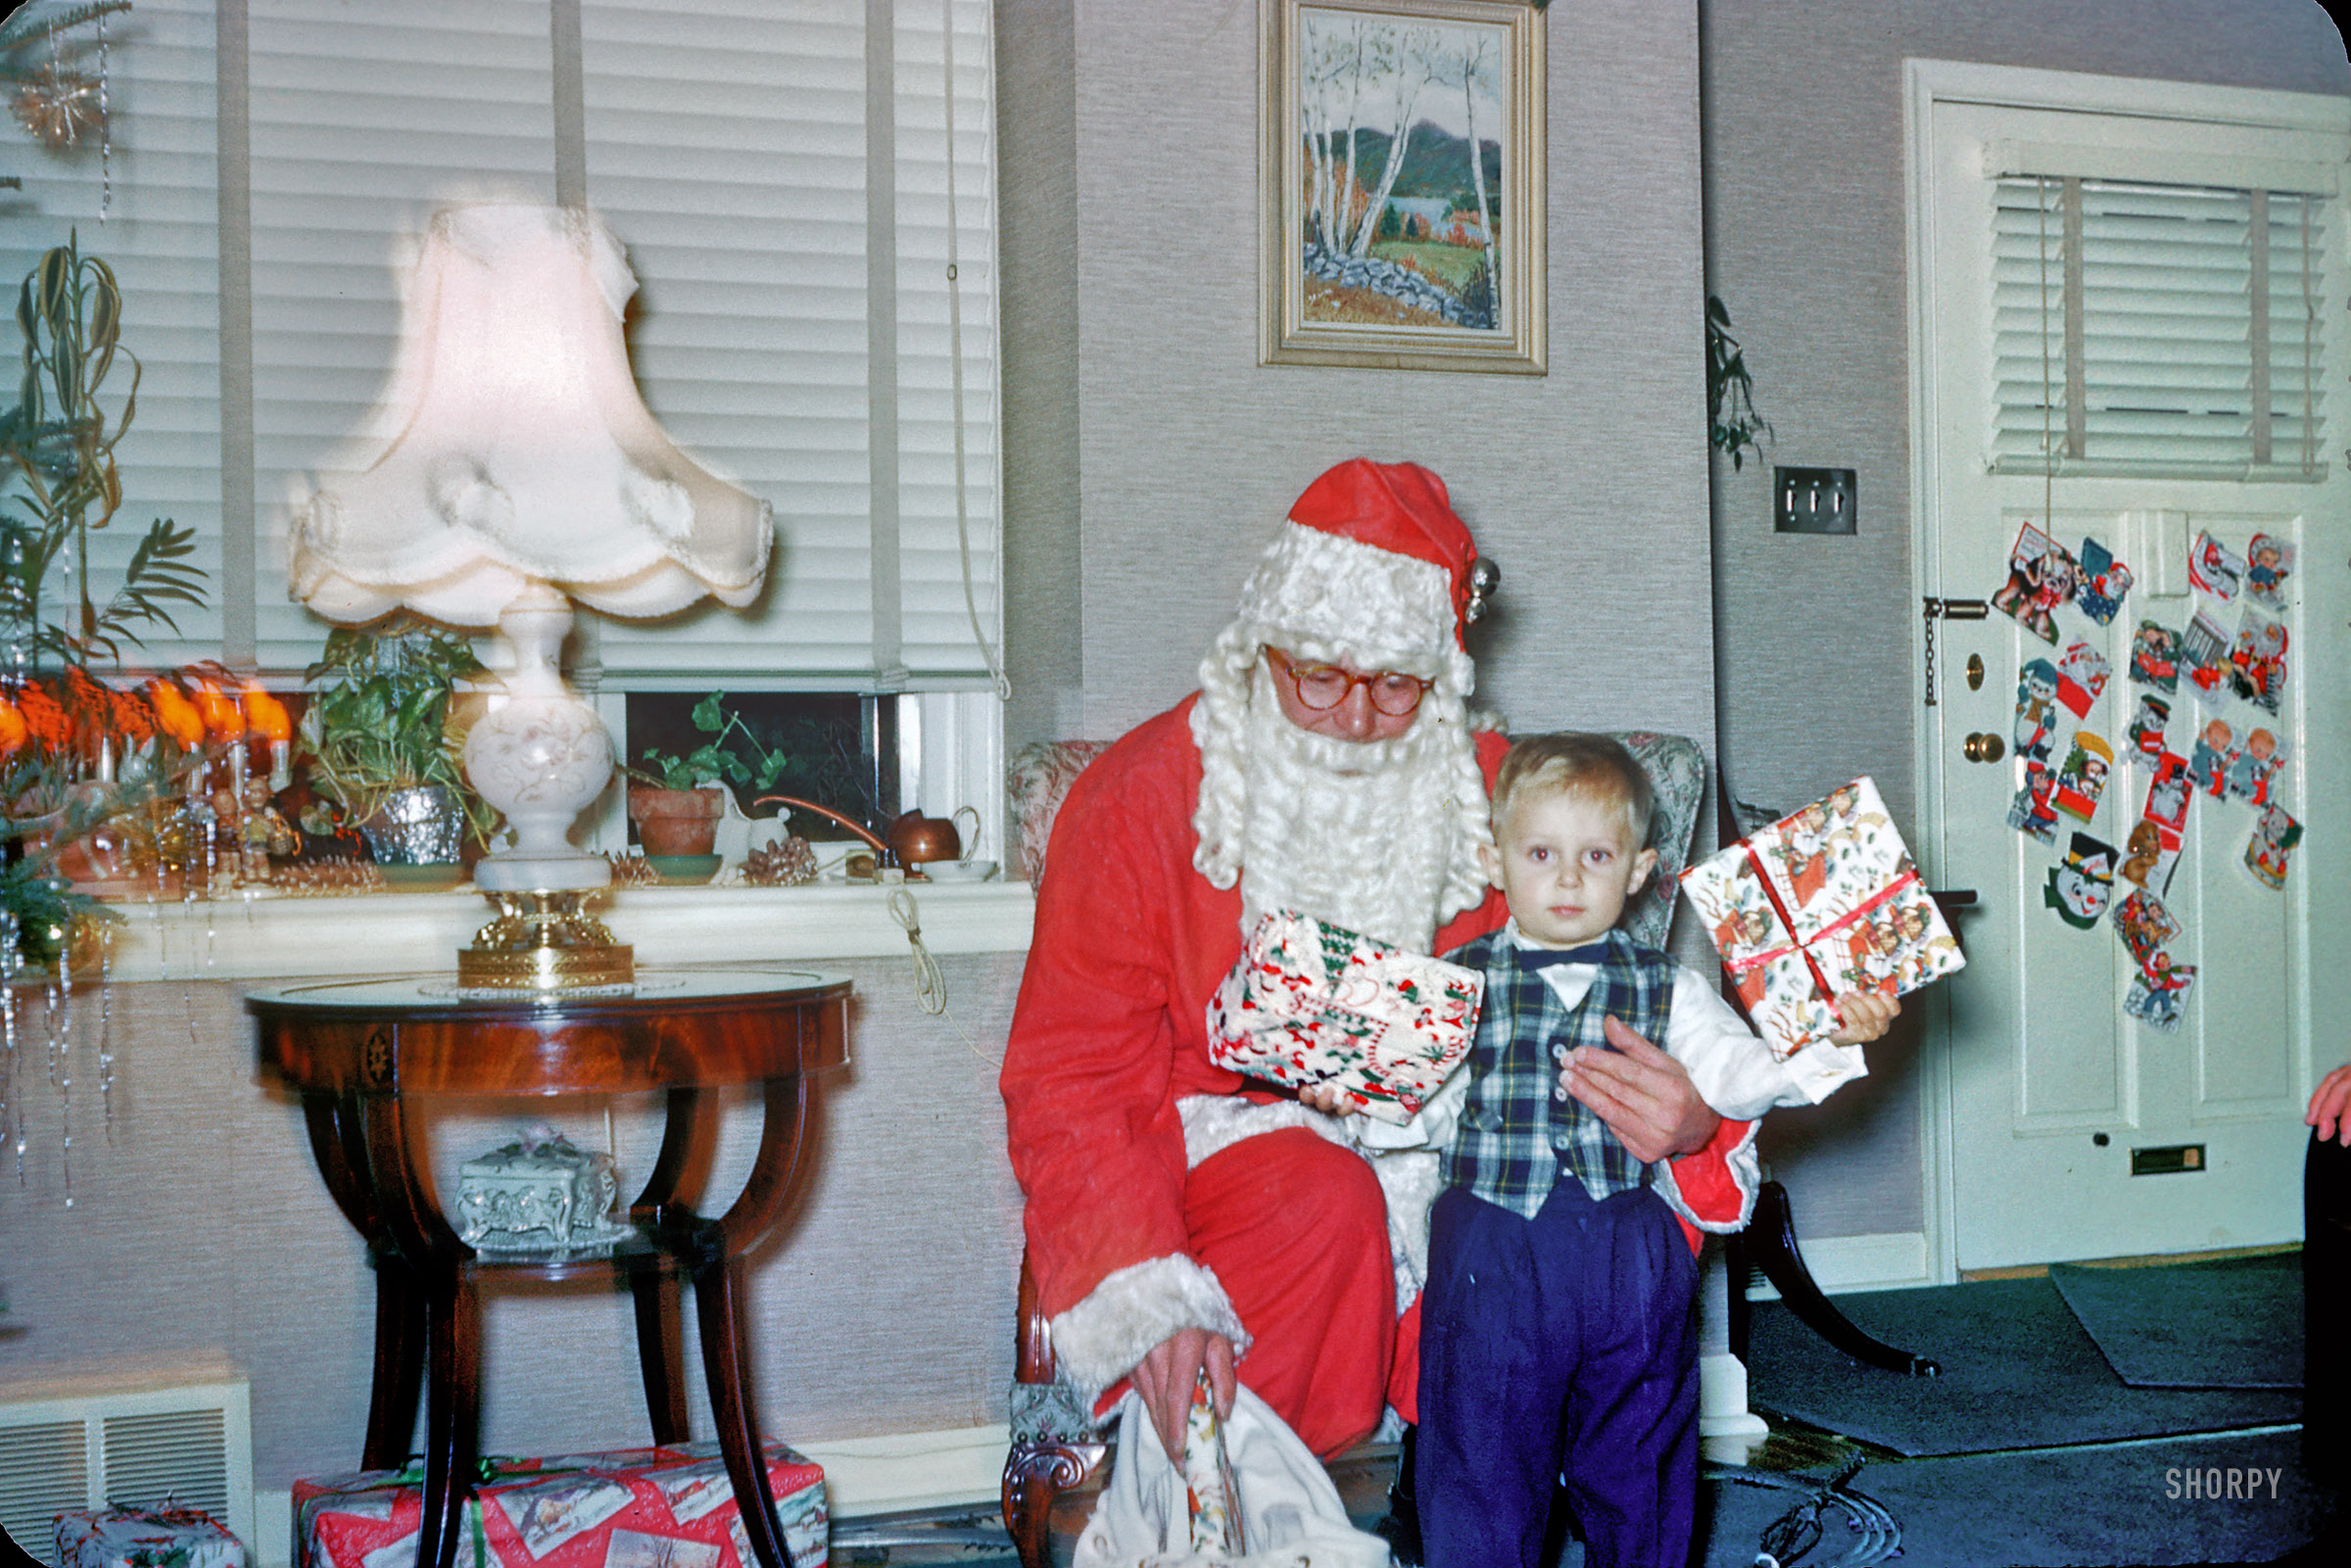 Pennsylvania circa 1958. This little boy was evidently on the "nice" list. (Isn't it funny how Santa and Uncle Bert have the same eyeglasses?) Note the abundance of mid-century tchotchkes. 35mm Kodachrome found on eBay. View full size.